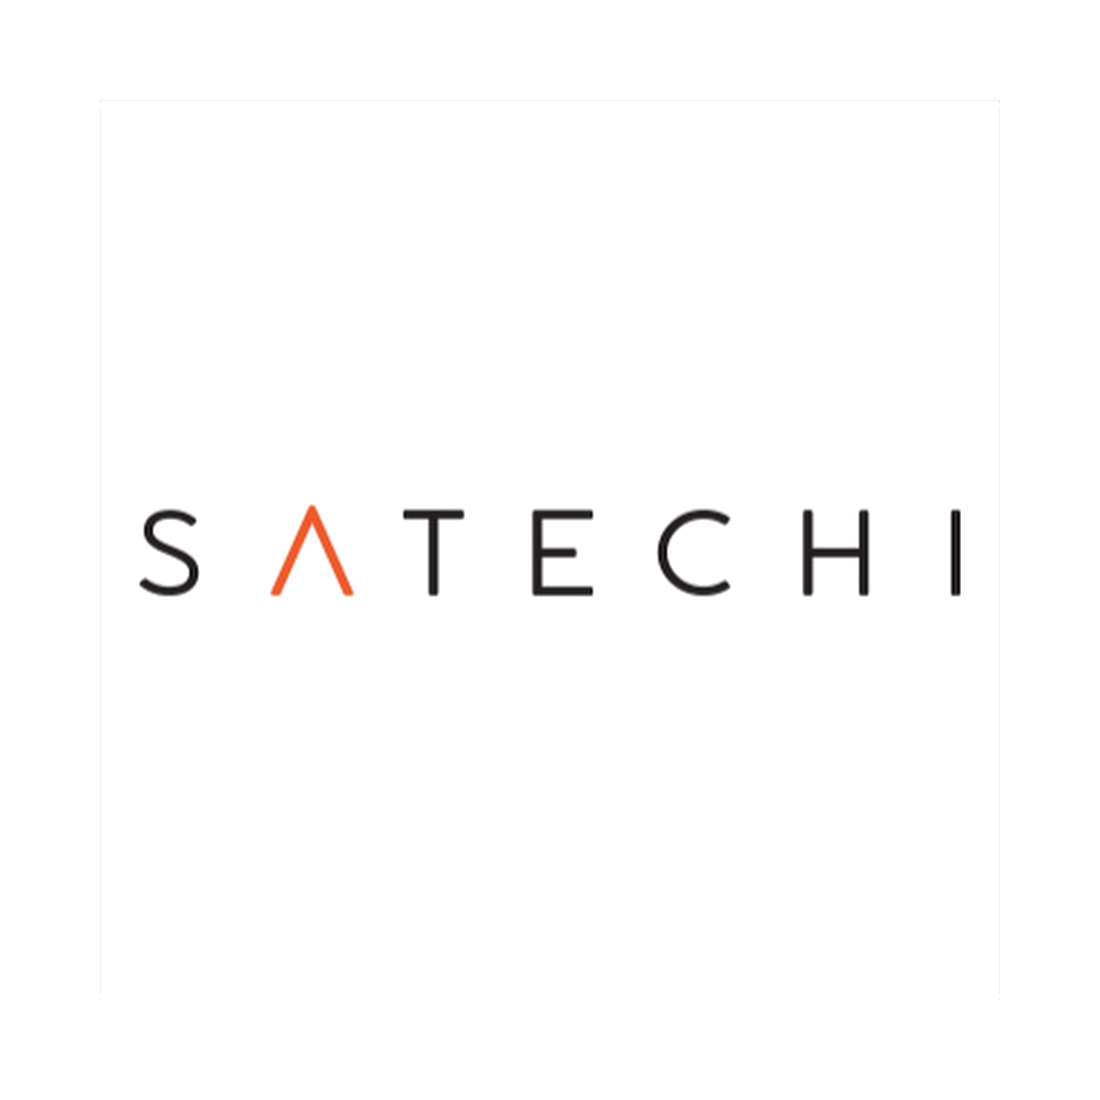 SATECHI Wired Keyboard for MacOS - Silver